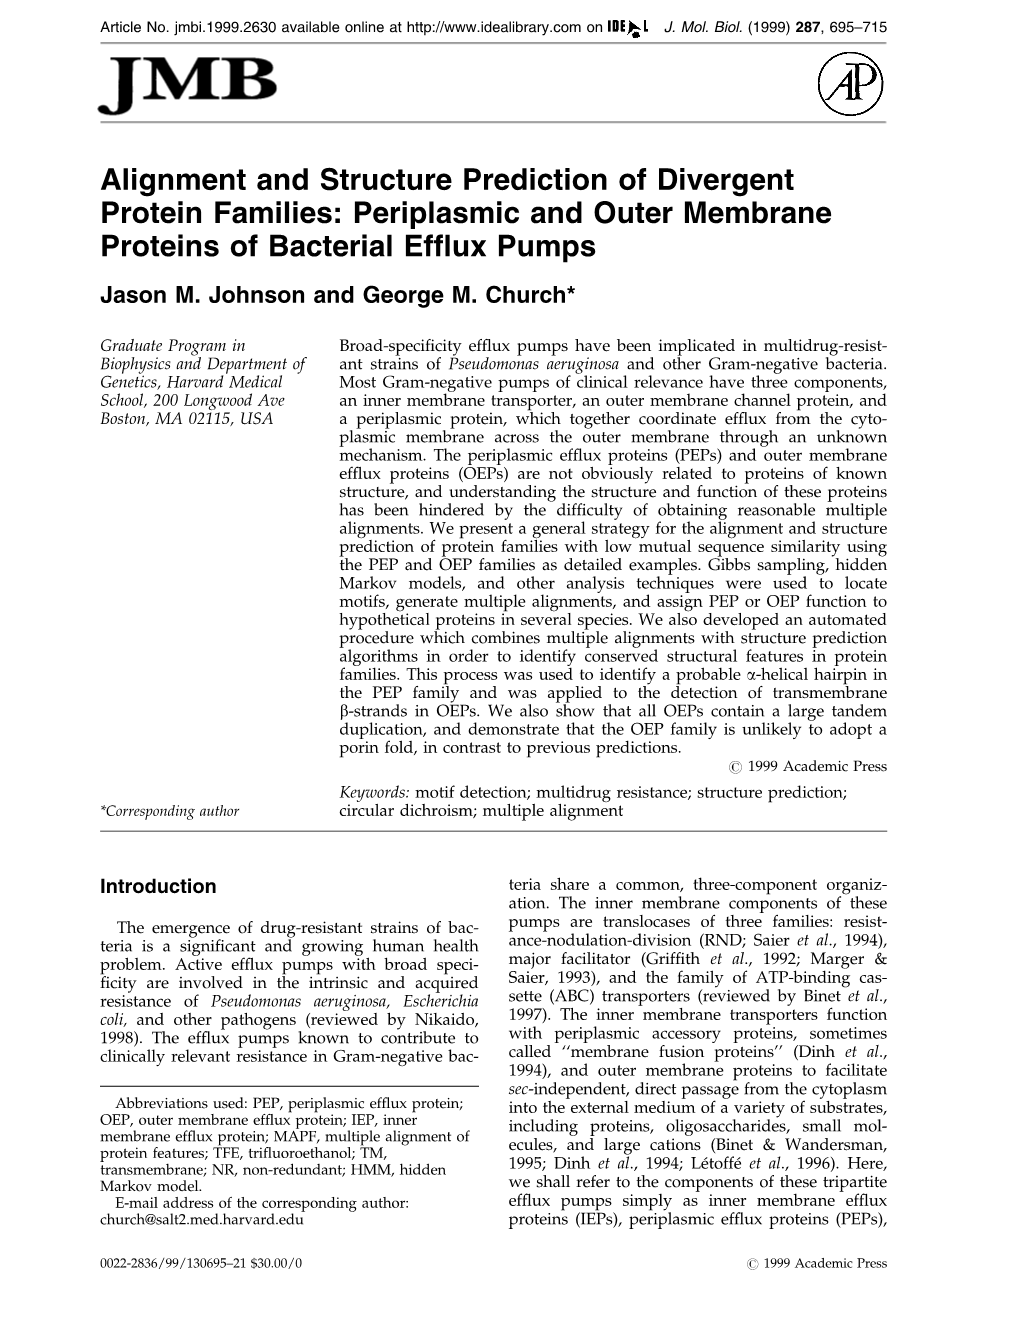 Alignment and Structure Prediction of Divergent Protein Families: Periplasmic and Outer Membrane Proteins of Bacterial Efflux Pumps Jason M